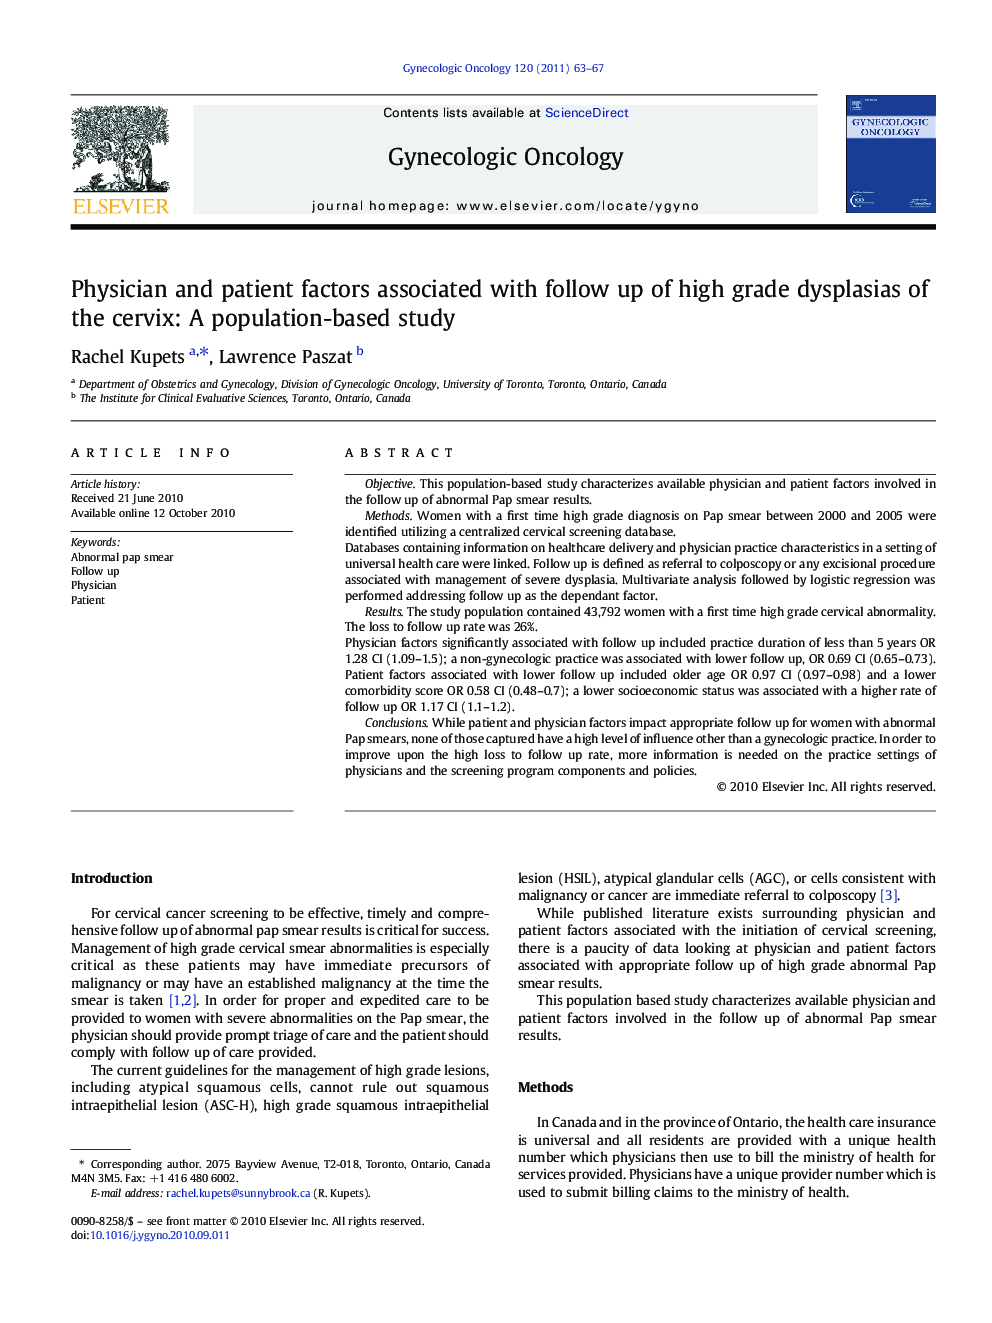 Physician and patient factors associated with follow up of high grade dysplasias of the cervix: A population-based study